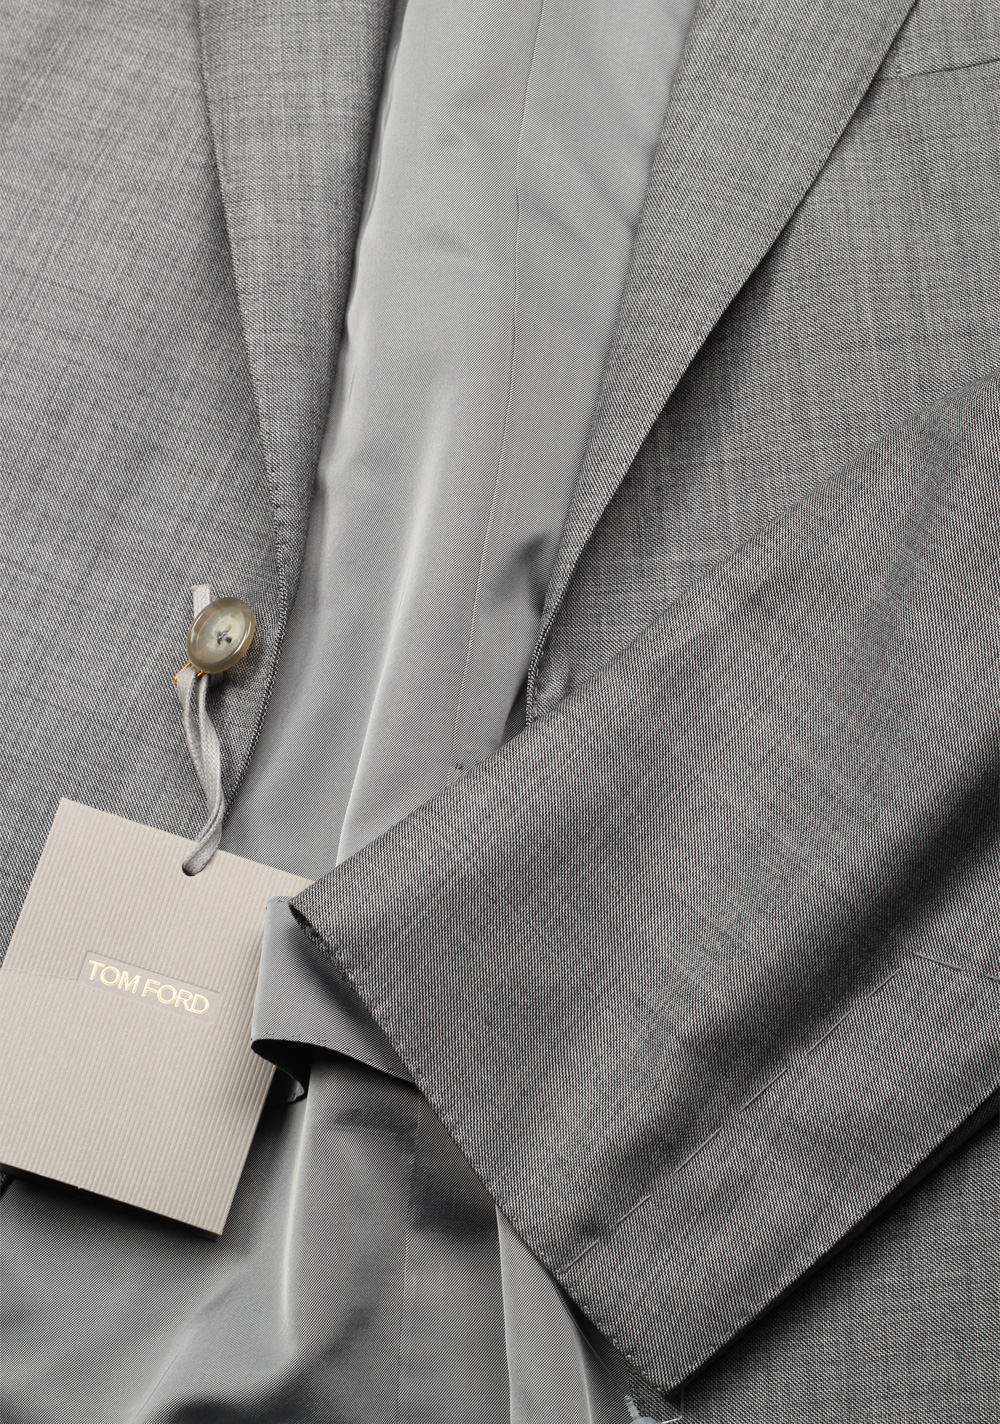 TOM FORD O’Connor Gray Suit Size 54 / 44R U.S. Wool Fit Y | Costume Limité